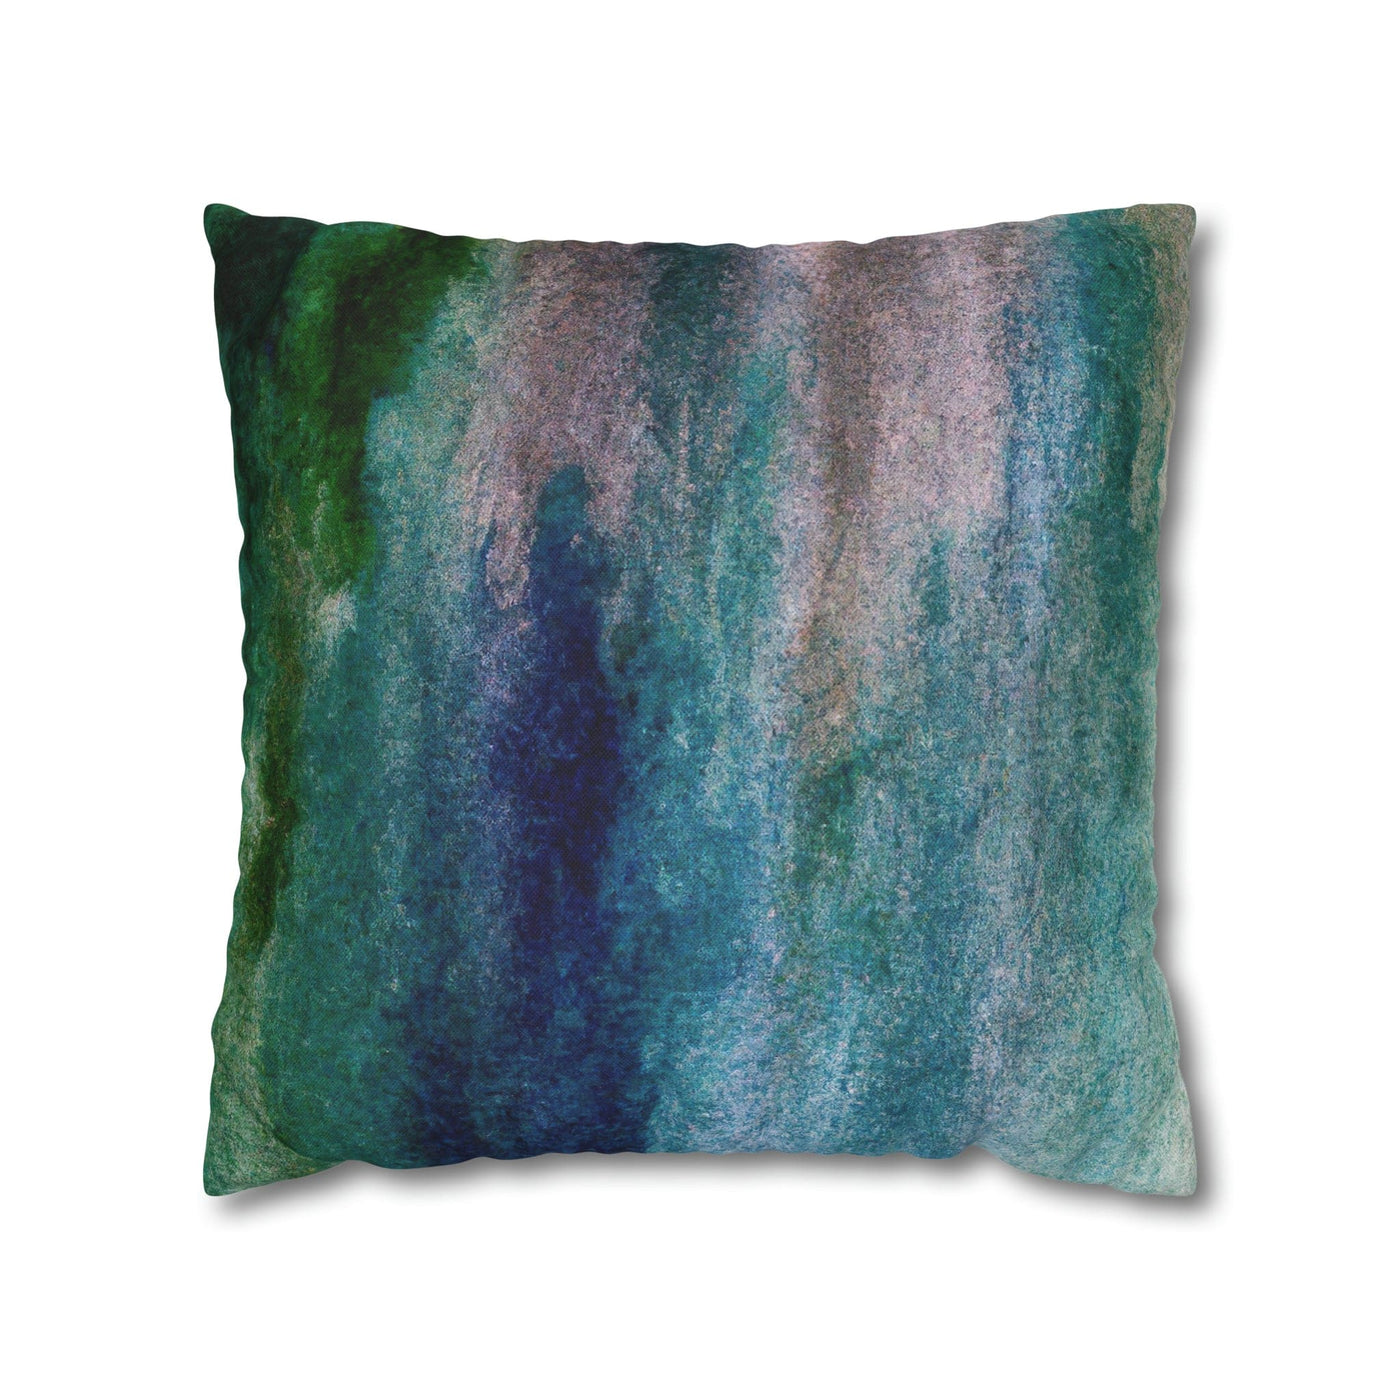 Decorative Throw Pillow Covers With Zipper - Set Of 2 Blue Hue Watercolor